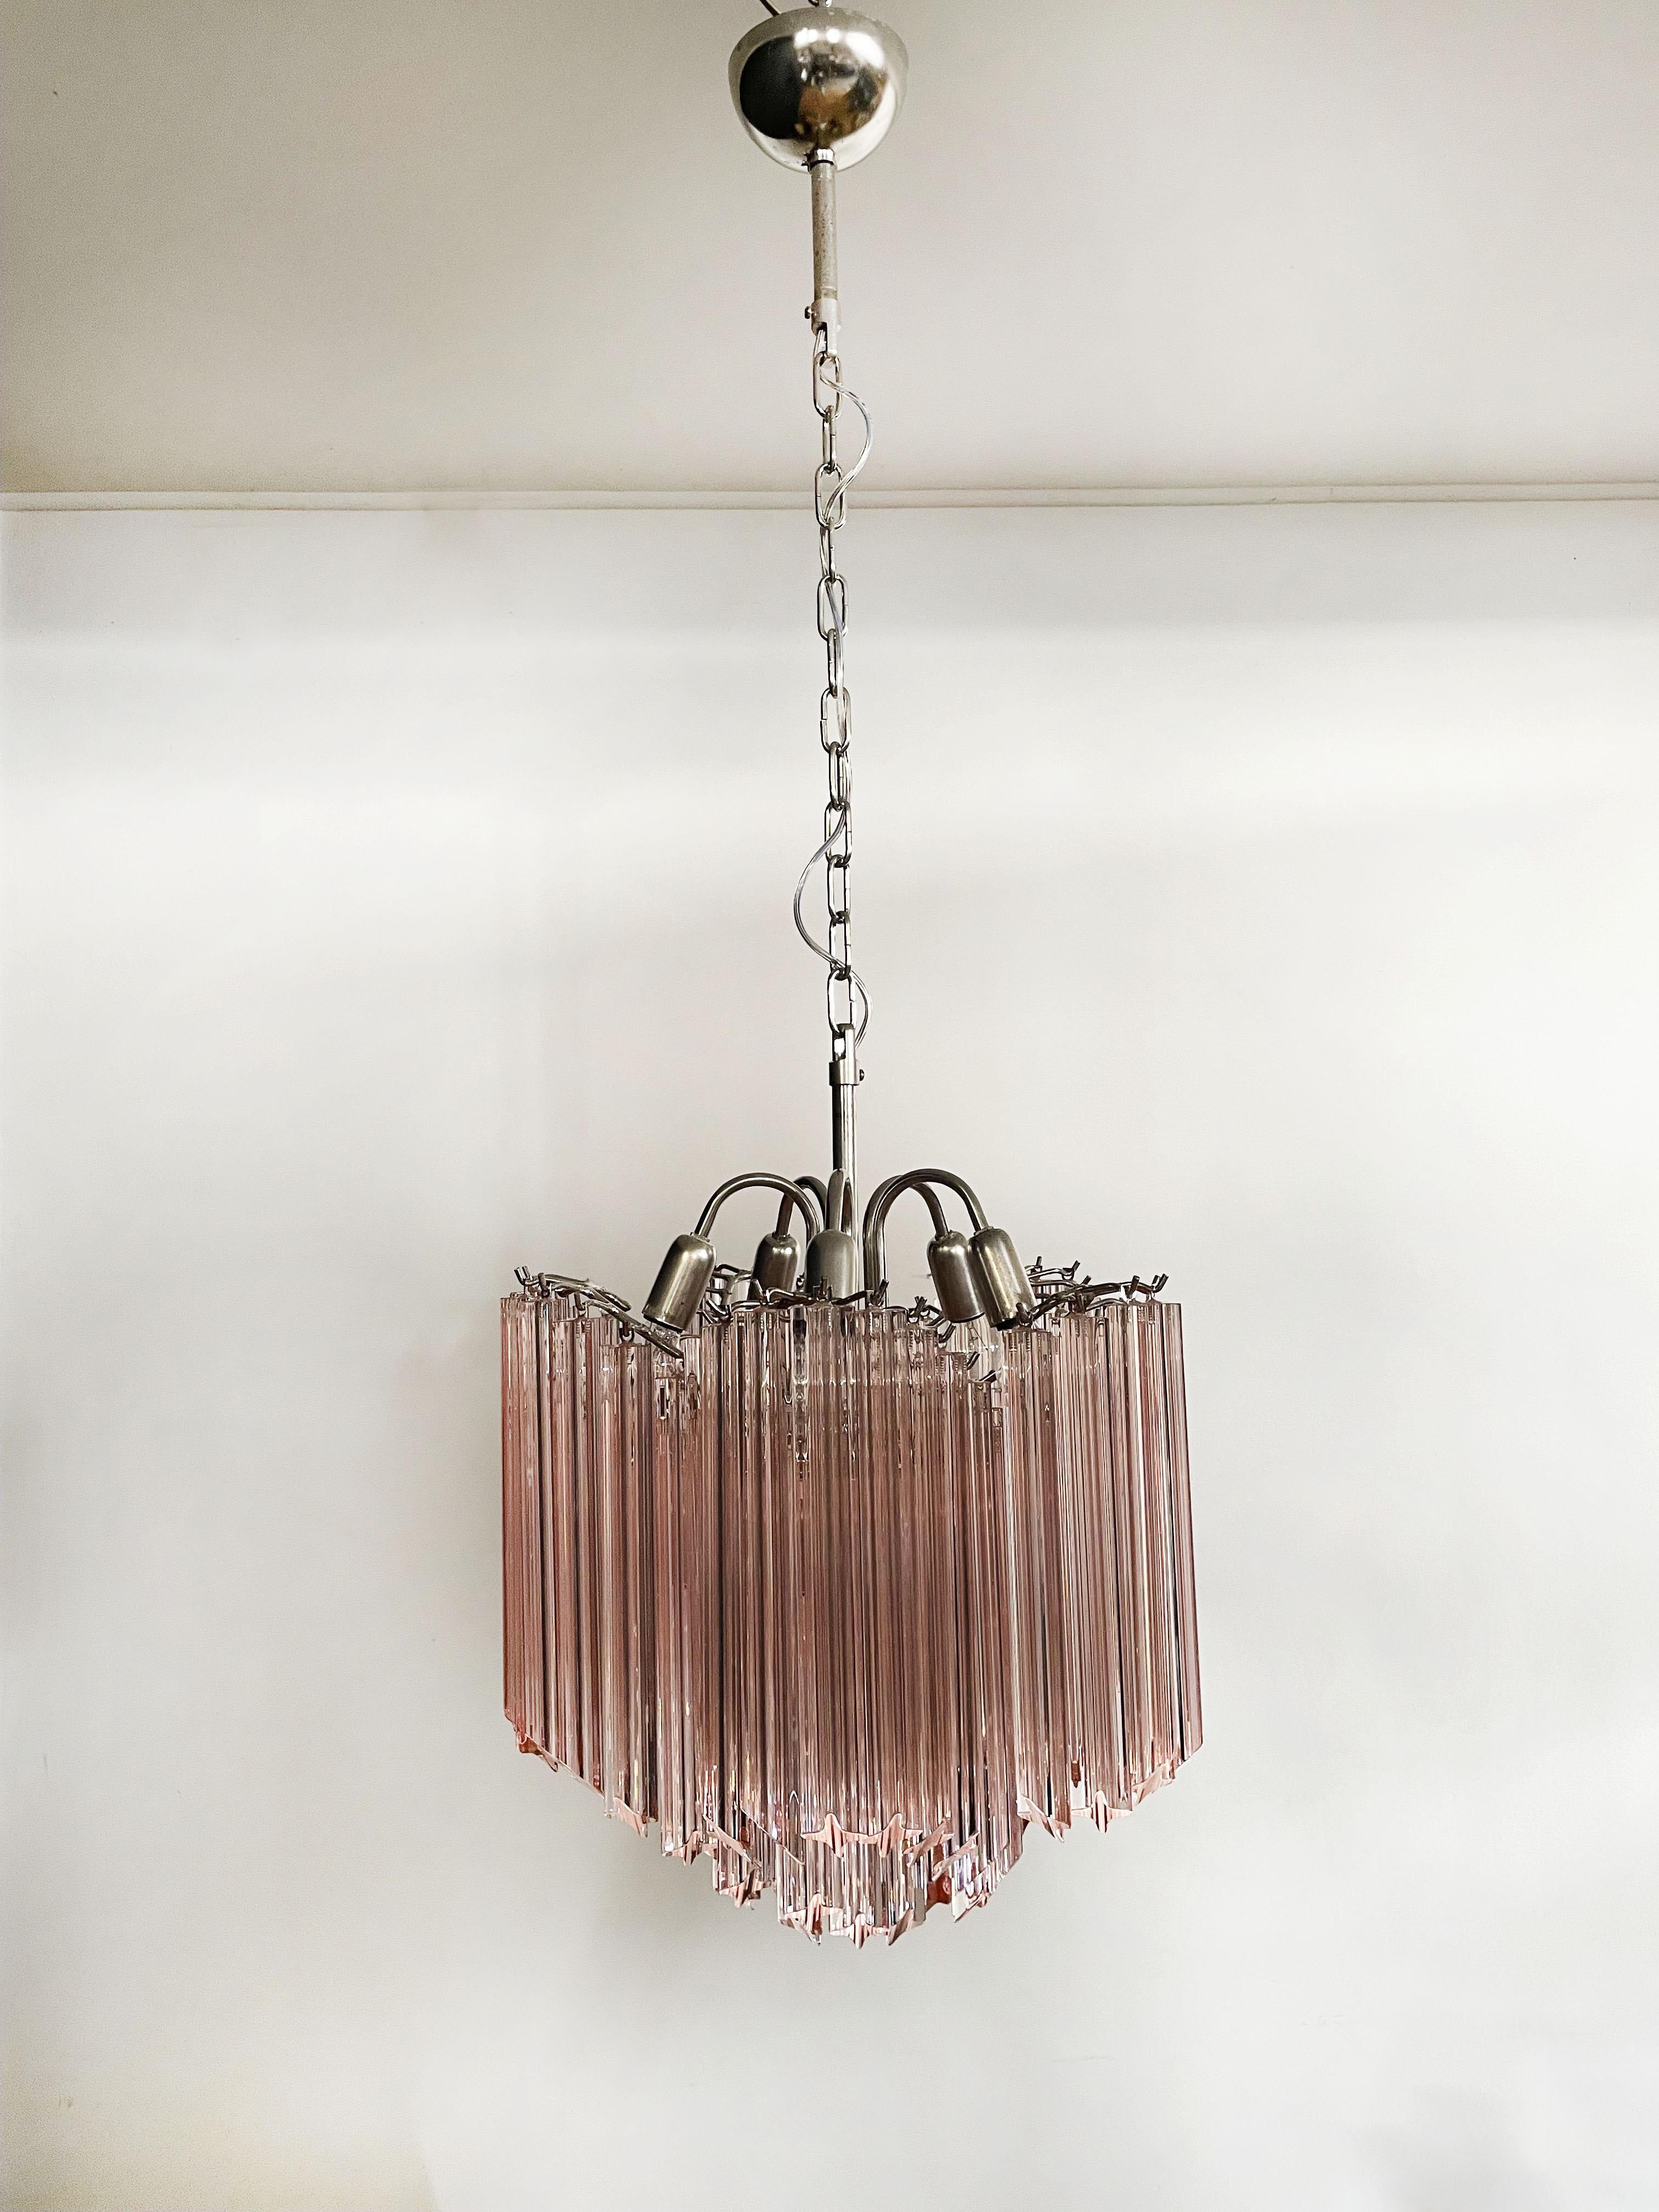 A magnificent Murano glass unique chandelier, spiral shape, very elegant, 60 pink quadriedri on nickel metal frame. This Mid-Century Italian chandelier is truly a timeless classic.
Period: late xx century
Dimensions: 46,50inches (120 cm) height